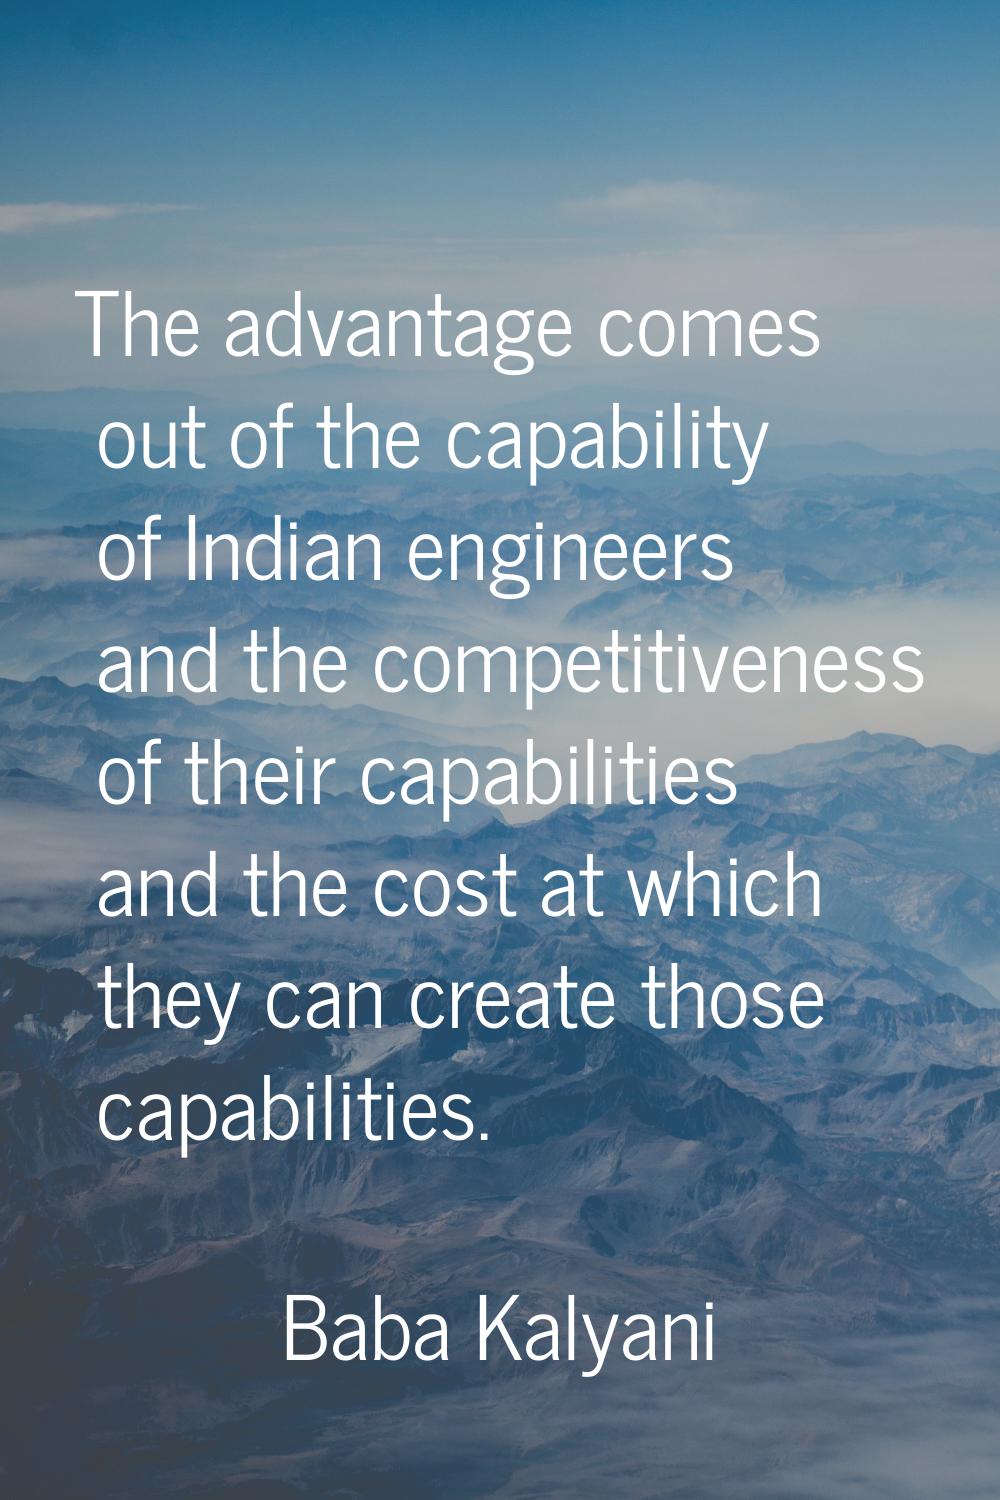 The advantage comes out of the capability of Indian engineers and the competitiveness of their capa